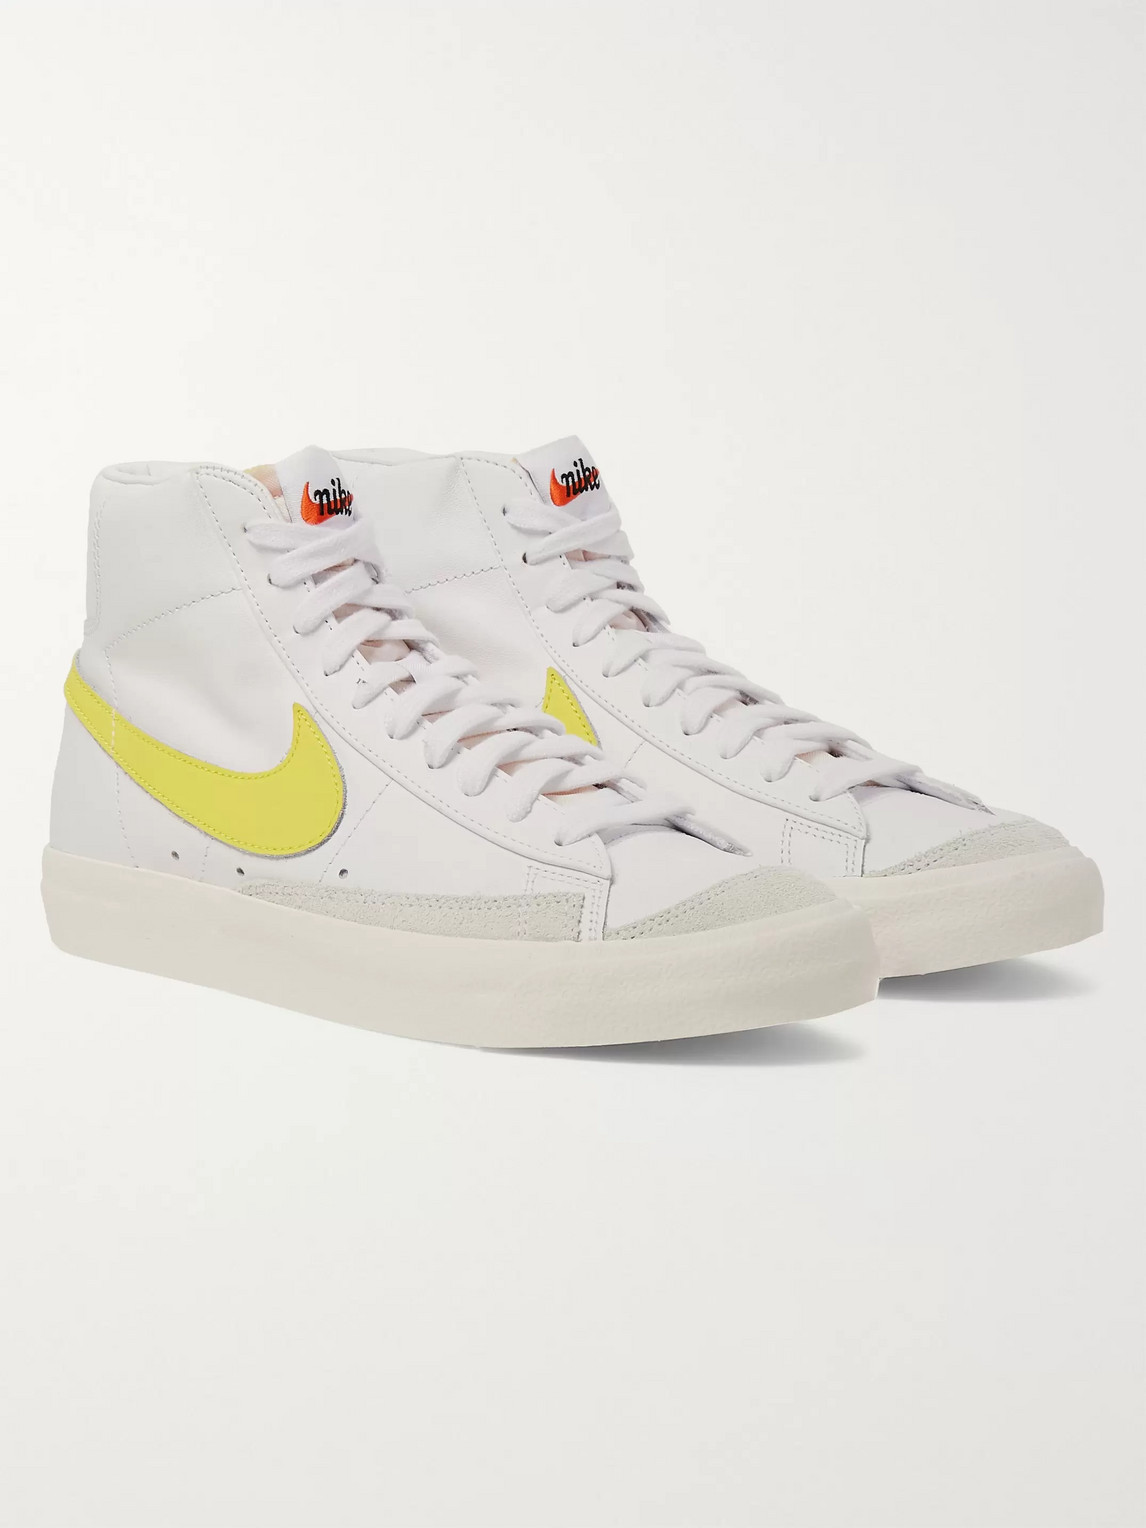 NIKE BLAZER MID '77 VINTAGE SUEDE-TRIMMED LEATHER HIGH-TOP SNEAKERS